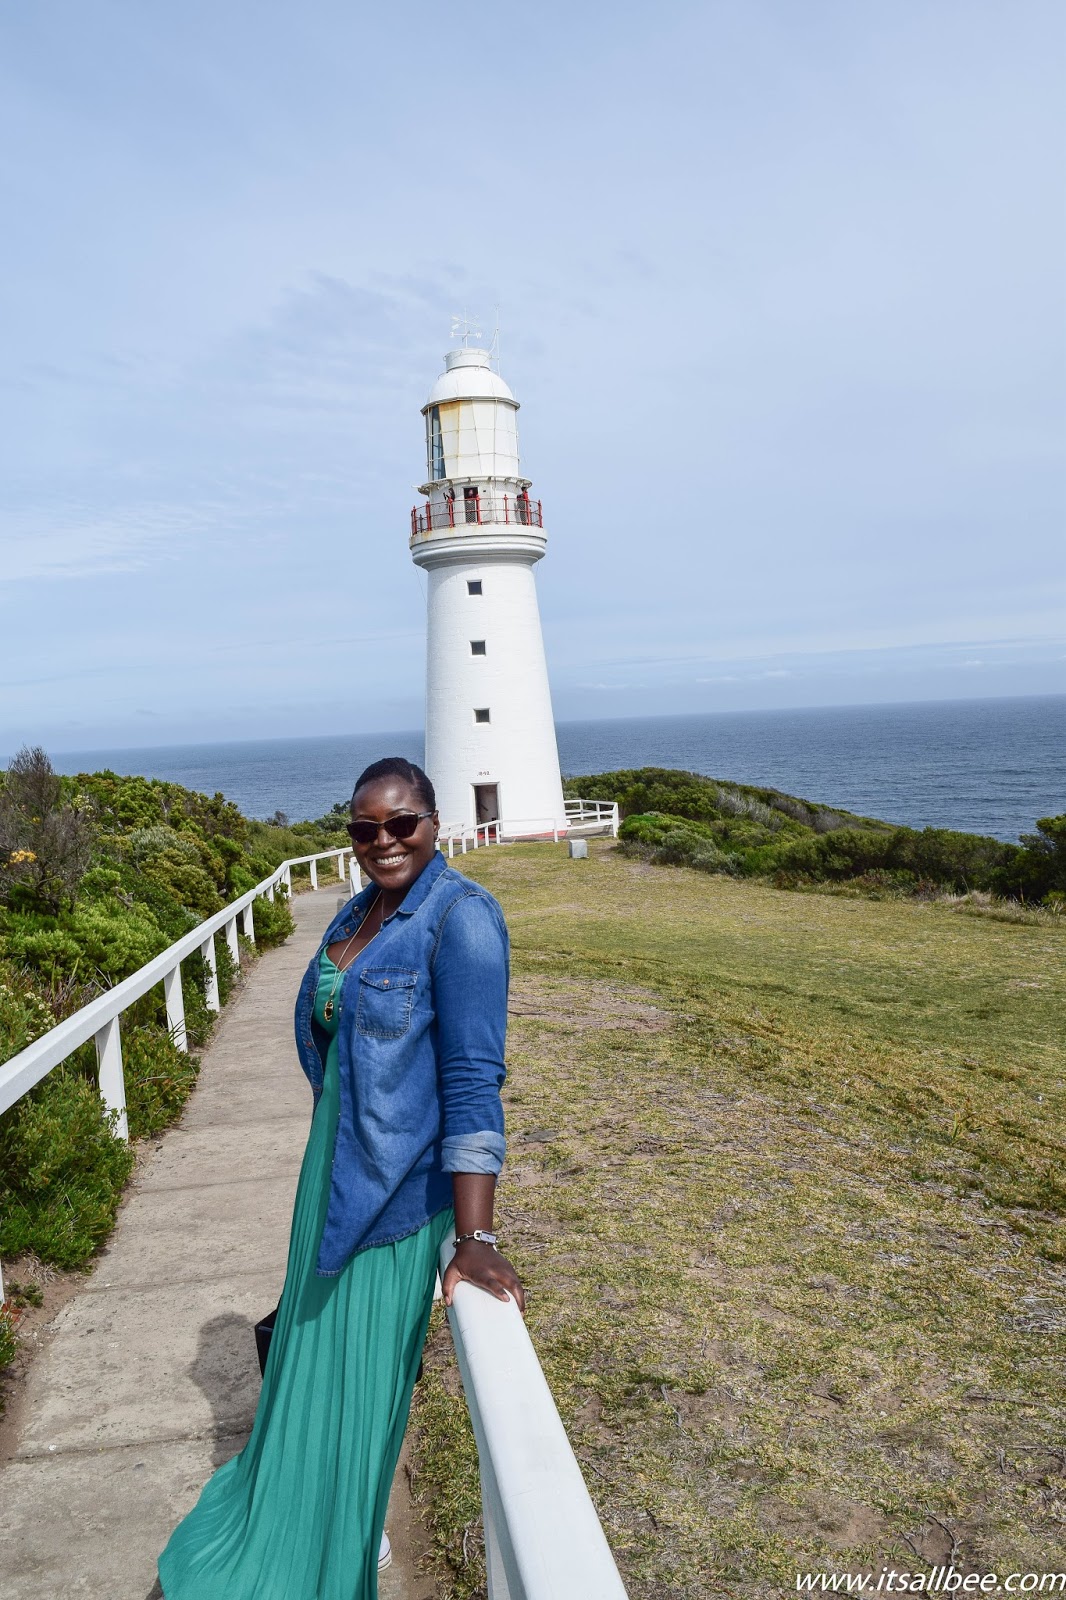 Great Ocean Road lighthouse| The Scenic Route From Melbourne